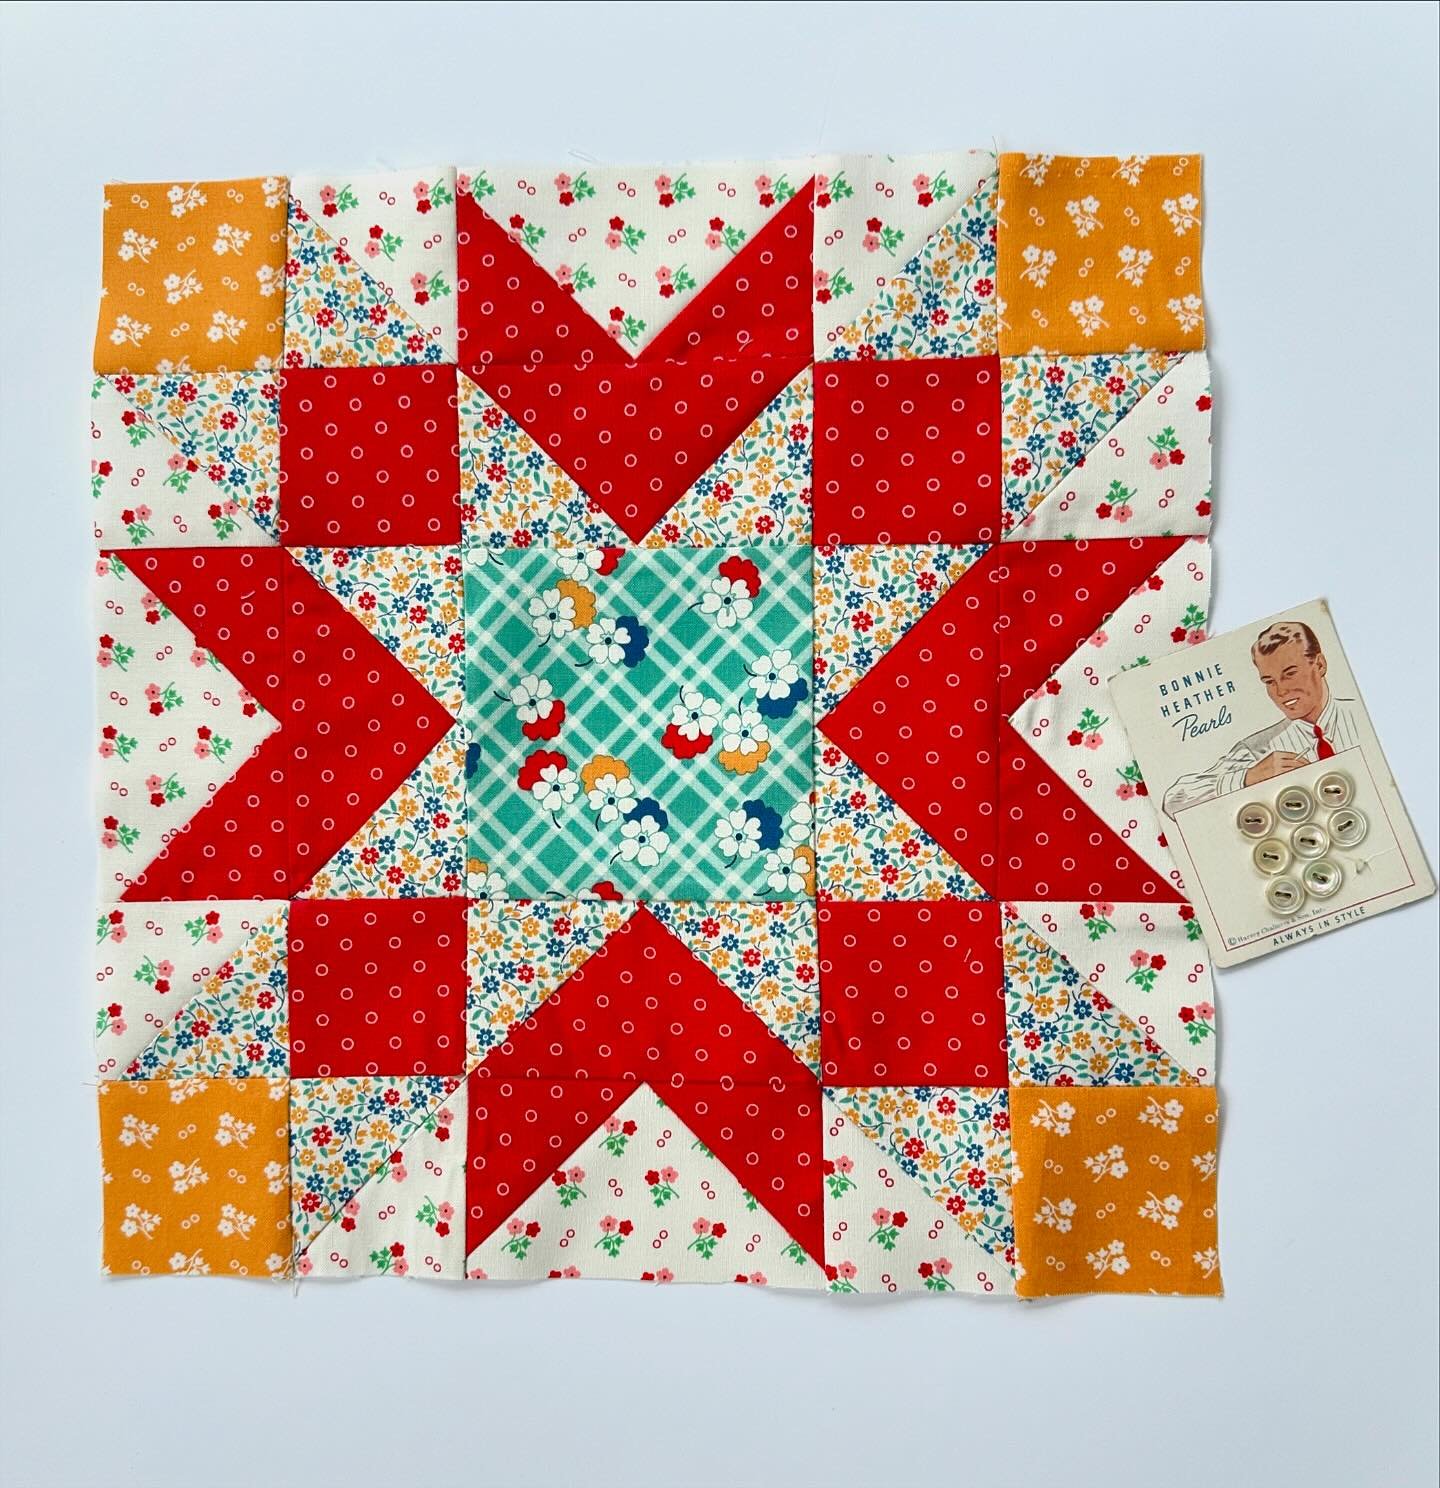 It's Blockheads day and here's Square Burst, the block by Stephanie of @fancythatdesignhouse. So many choices to make with this one! Make sure to scroll through @modafabrics post to see all the variations. Mine has a definite old-fashioned feel. Can'